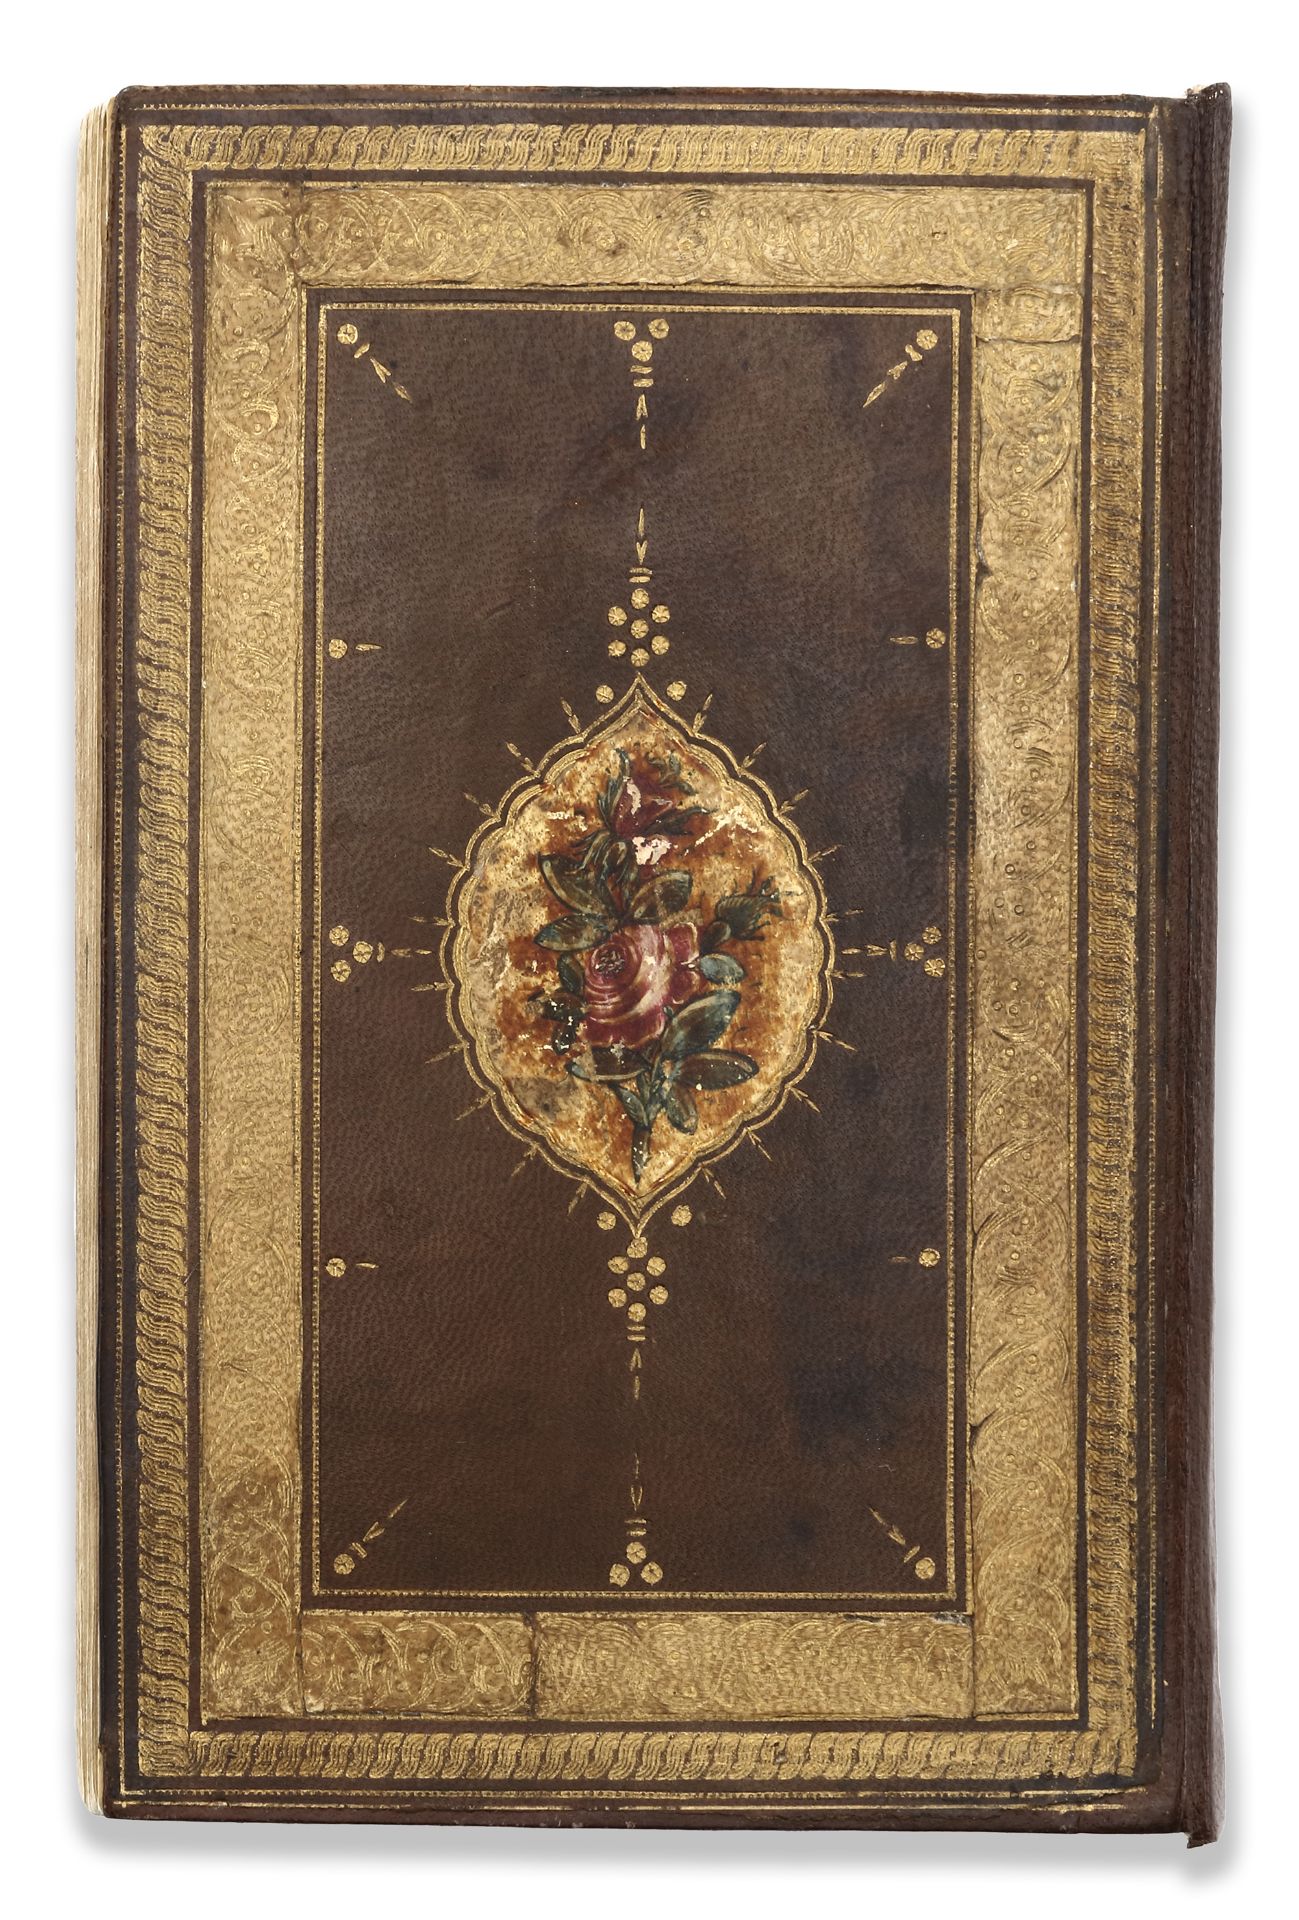 AN ILLUMINATED OTTOMAN QURAN SIGNED BY AHMED STUDENT OF HAFIZ OSMAN, 18TH CENTURY - Image 6 of 7